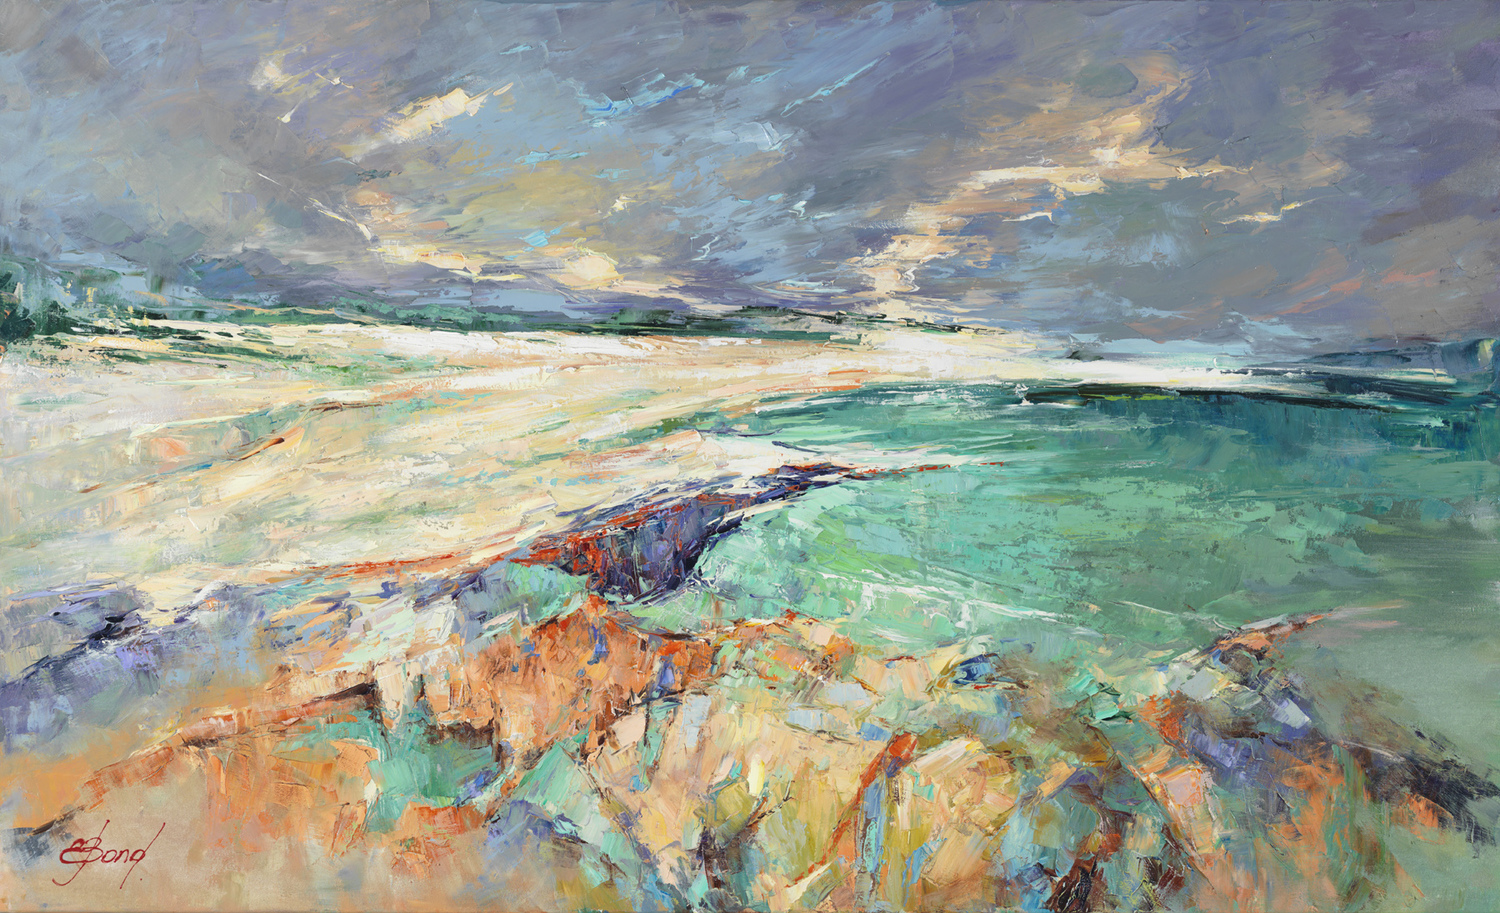 ELENA BOND - Winds And Tides - Oil on Canvas - 38x60 inches